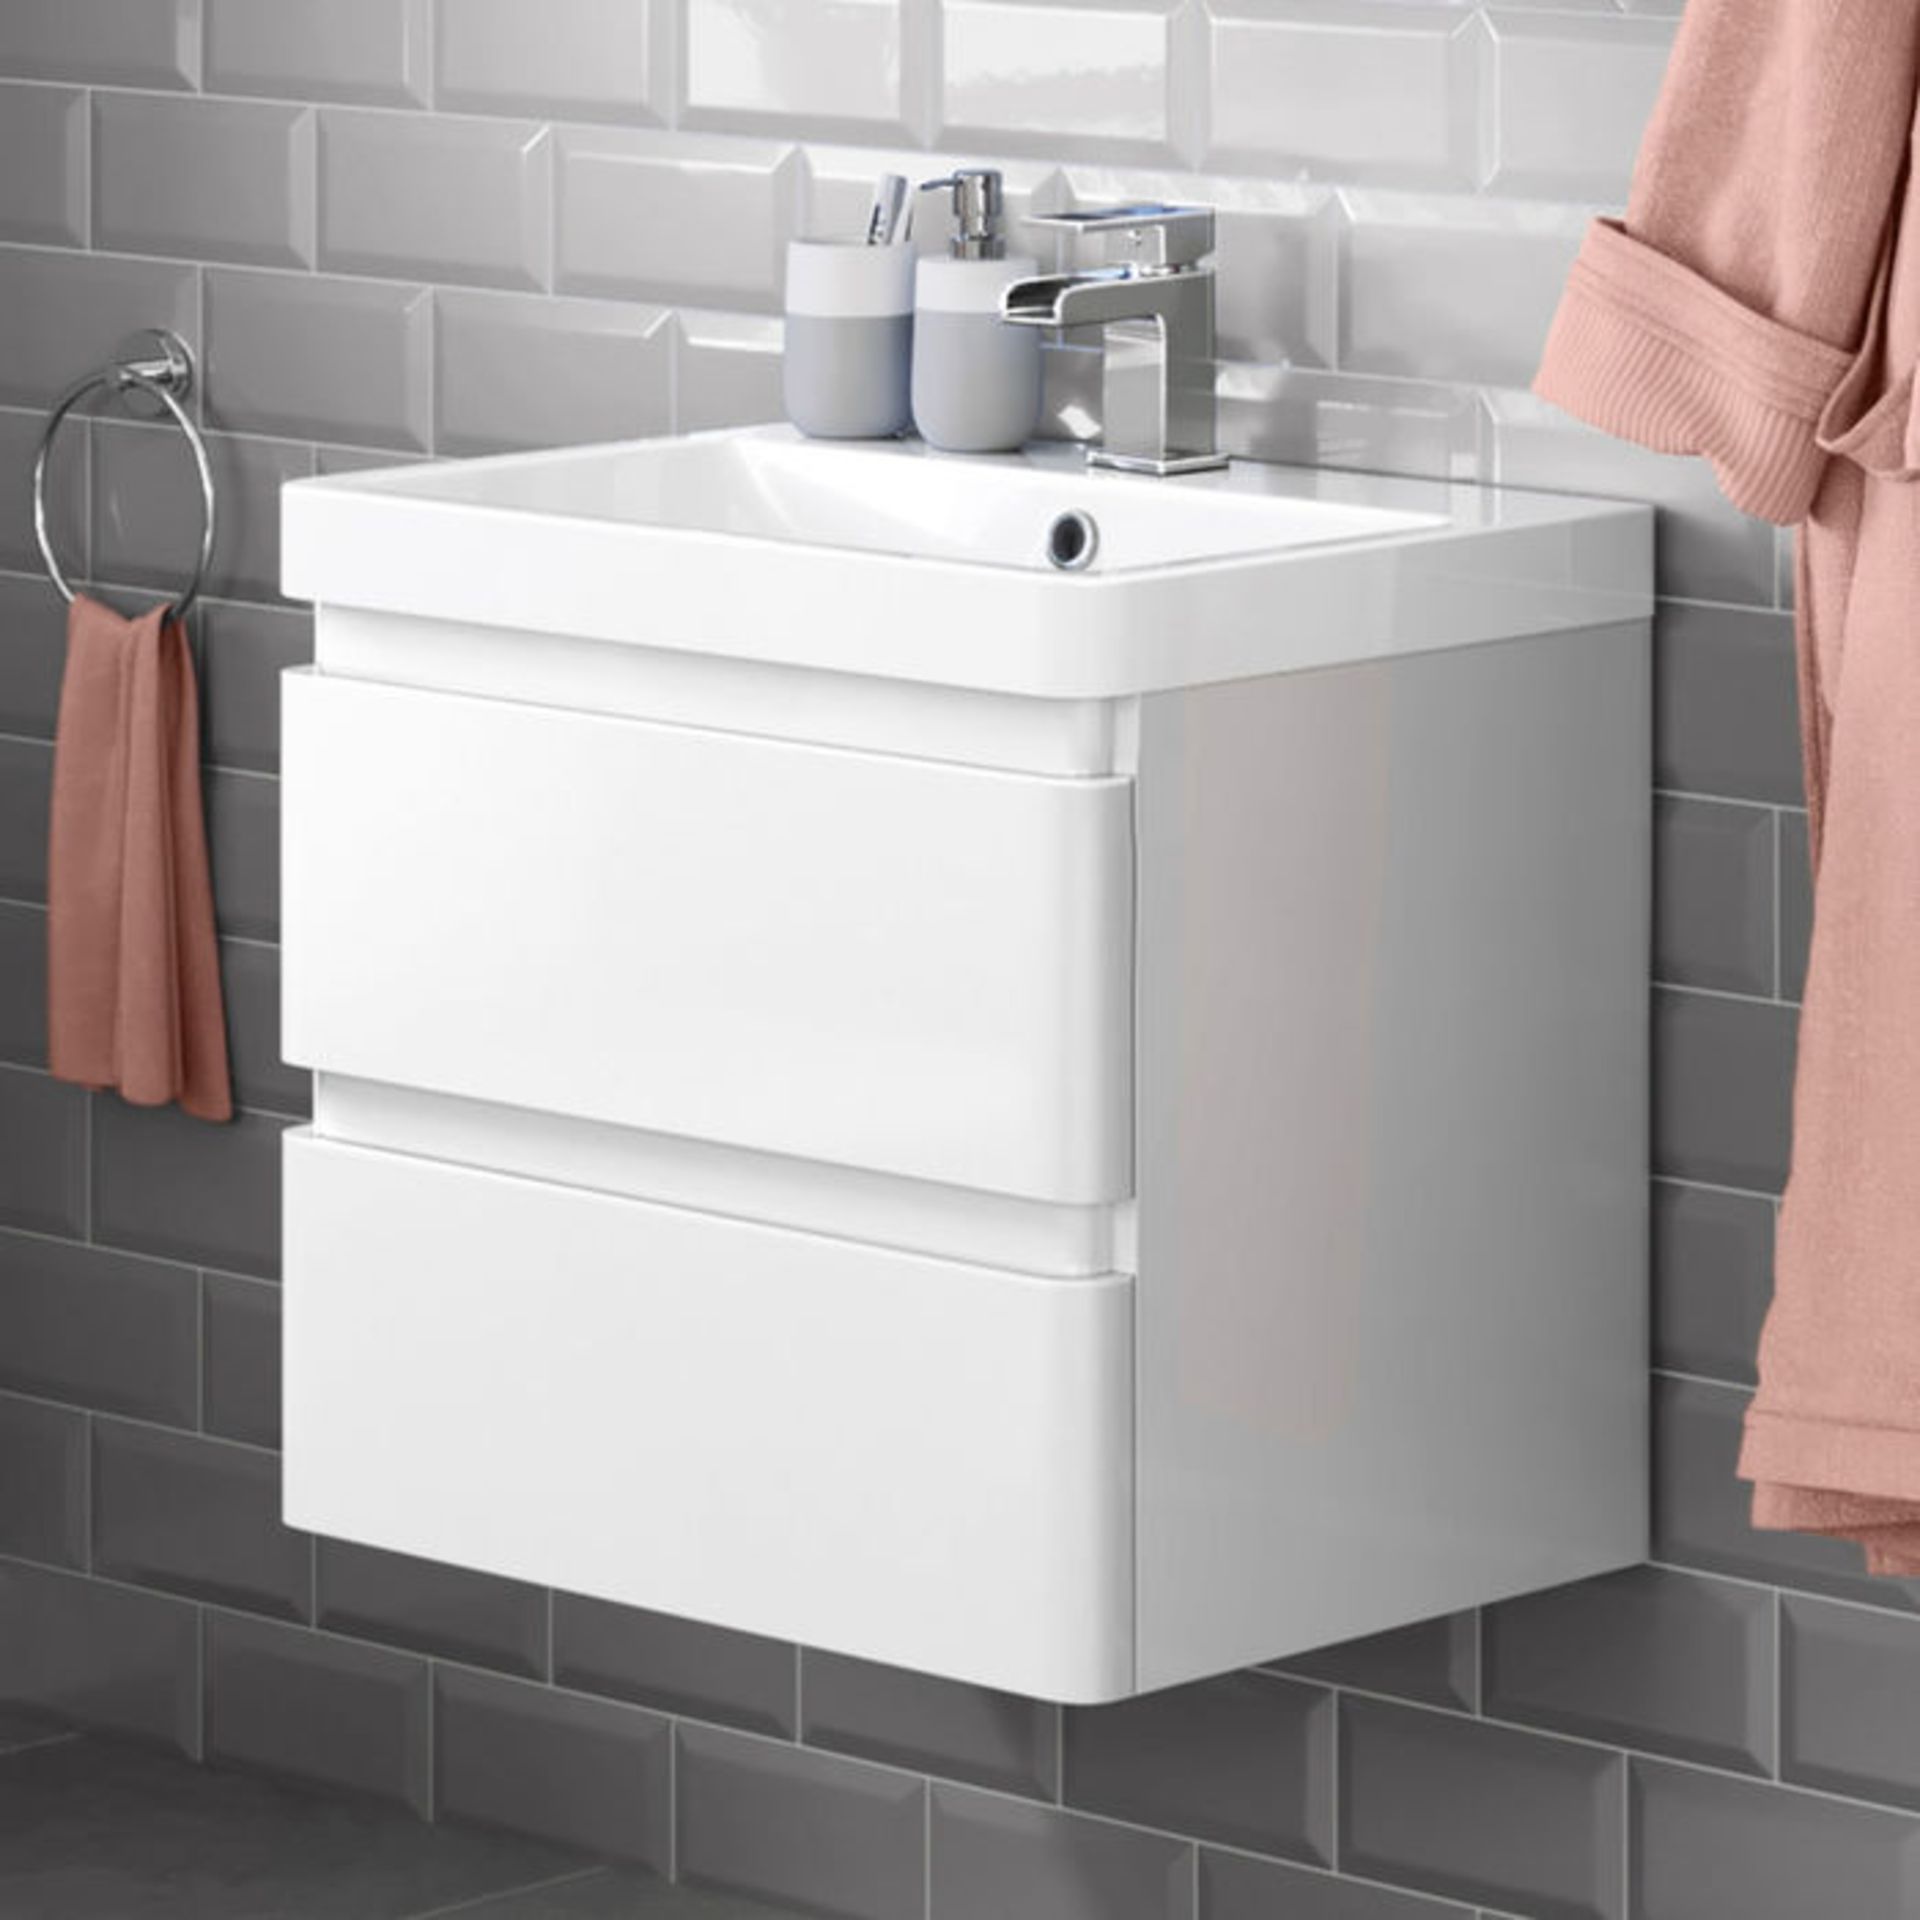 (GR19) 600mm Denver II Gloss White Built In Basin Drawer Unit - Wall Hung RRP £499.99. COMES